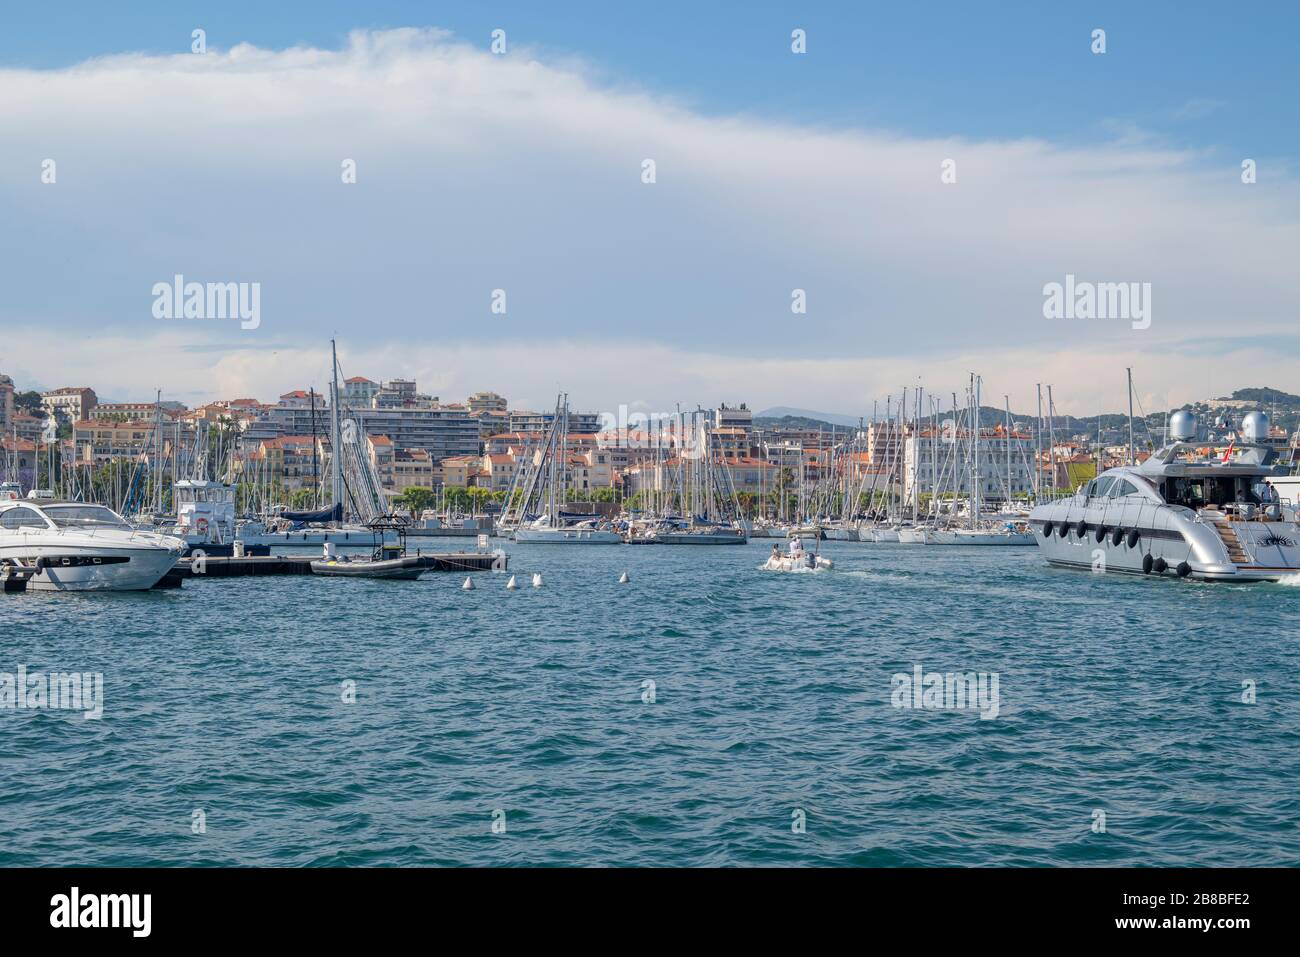 Cannes, France - 21.06.2019: Beautiful view on the town and marina. Cannes harbour view. Luxury yachts in the port. Travel locations in France Stock Photo